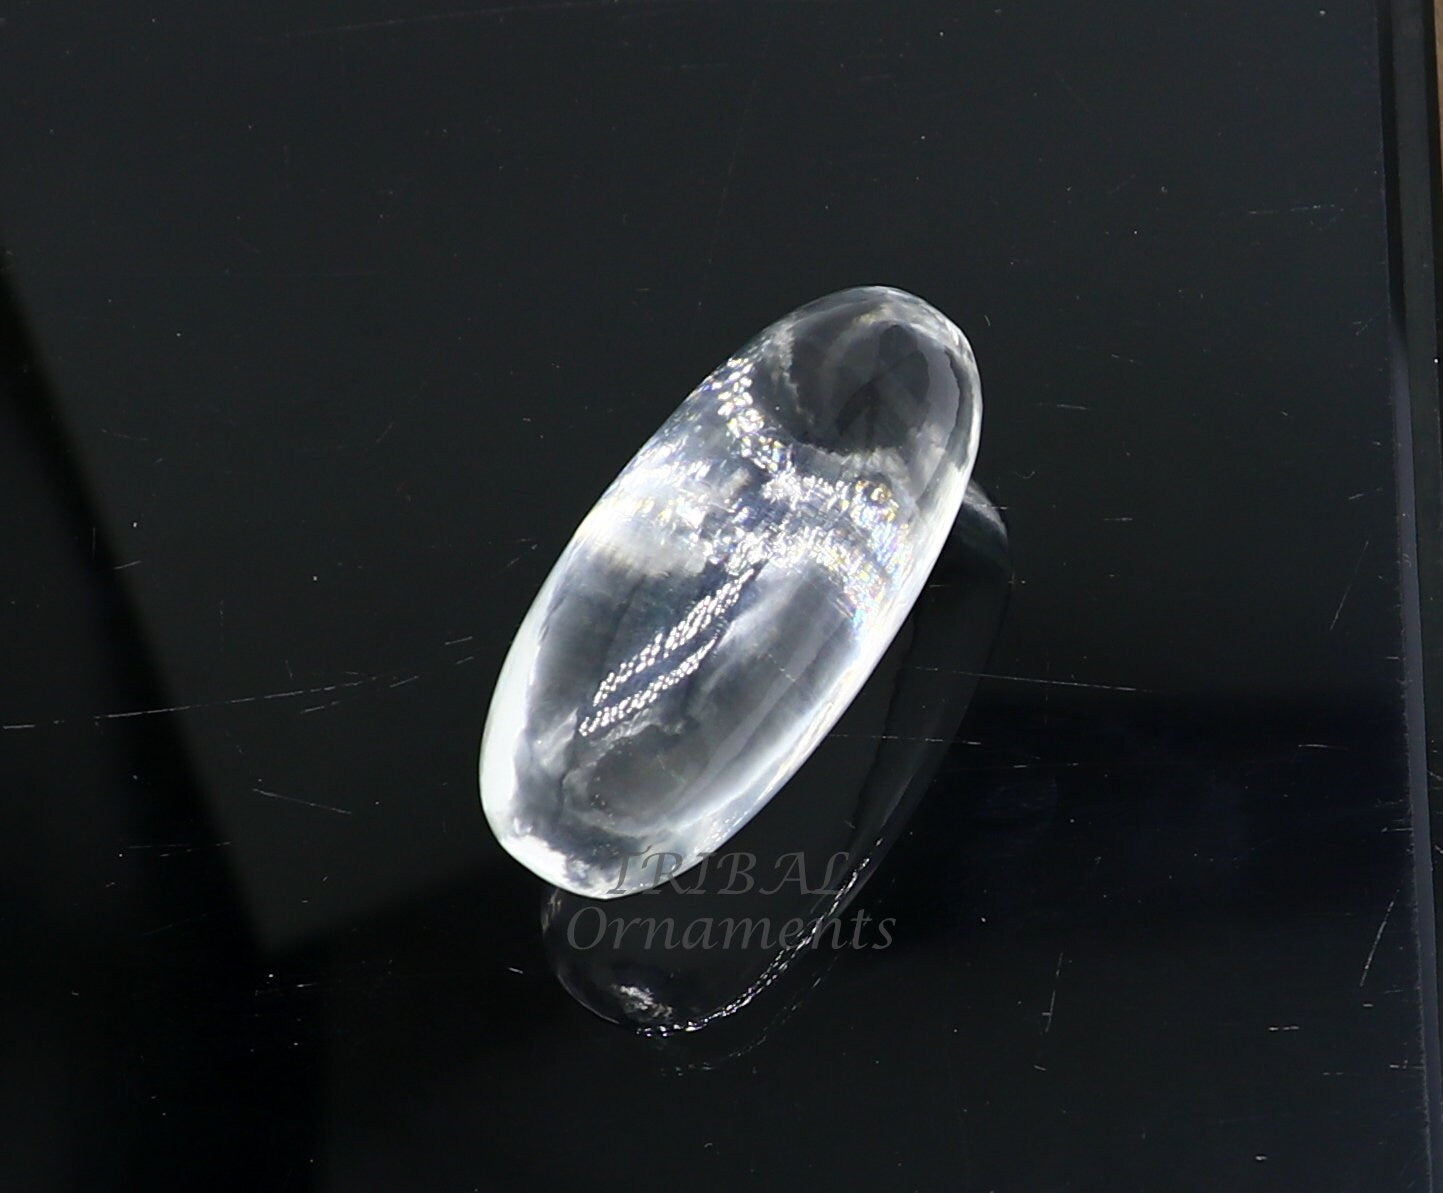 Divine Natural sphatik crystal stone divine lord shiva lingam statue, amazing sphatik lingam puja article for wealth and prosperity stna24 - TRIBAL ORNAMENTS